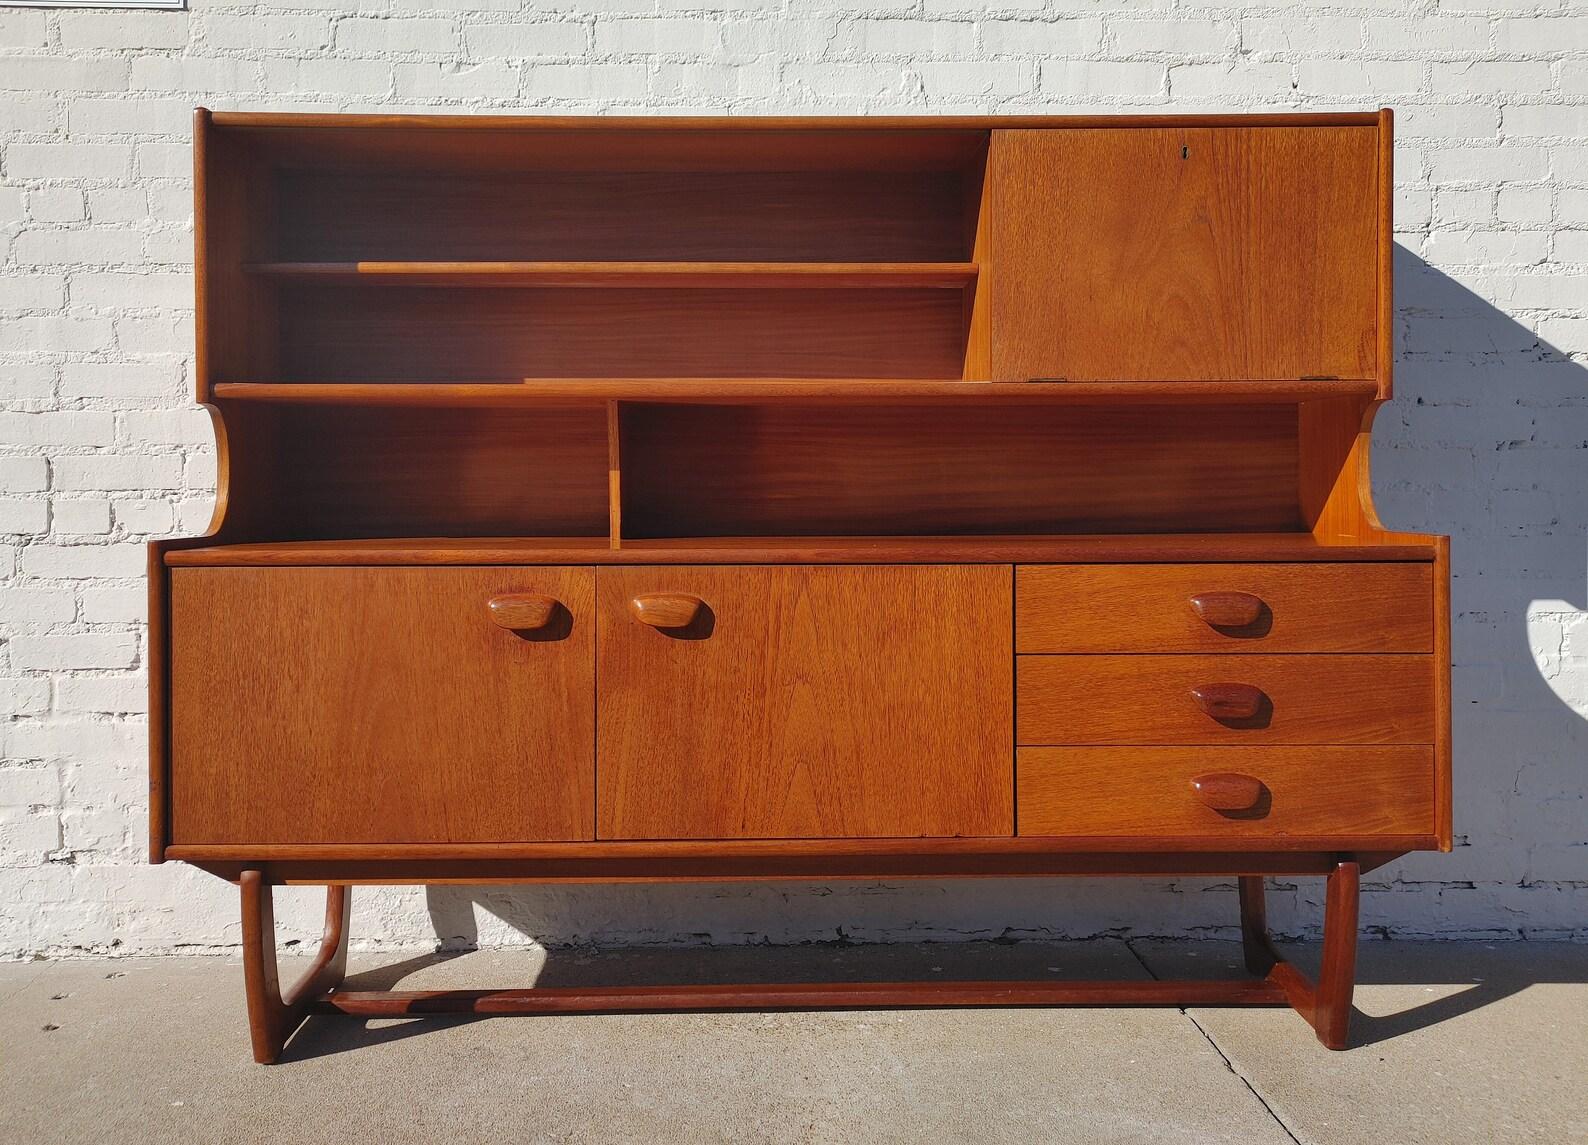 Mid Century English Modern Teak Hutch by G Plan

Above average vintage condition and structurally sound. Has some expected slight finish wear and scratching. Front has three small areas where the veneer is chipped. Please zoom in on listing pictures